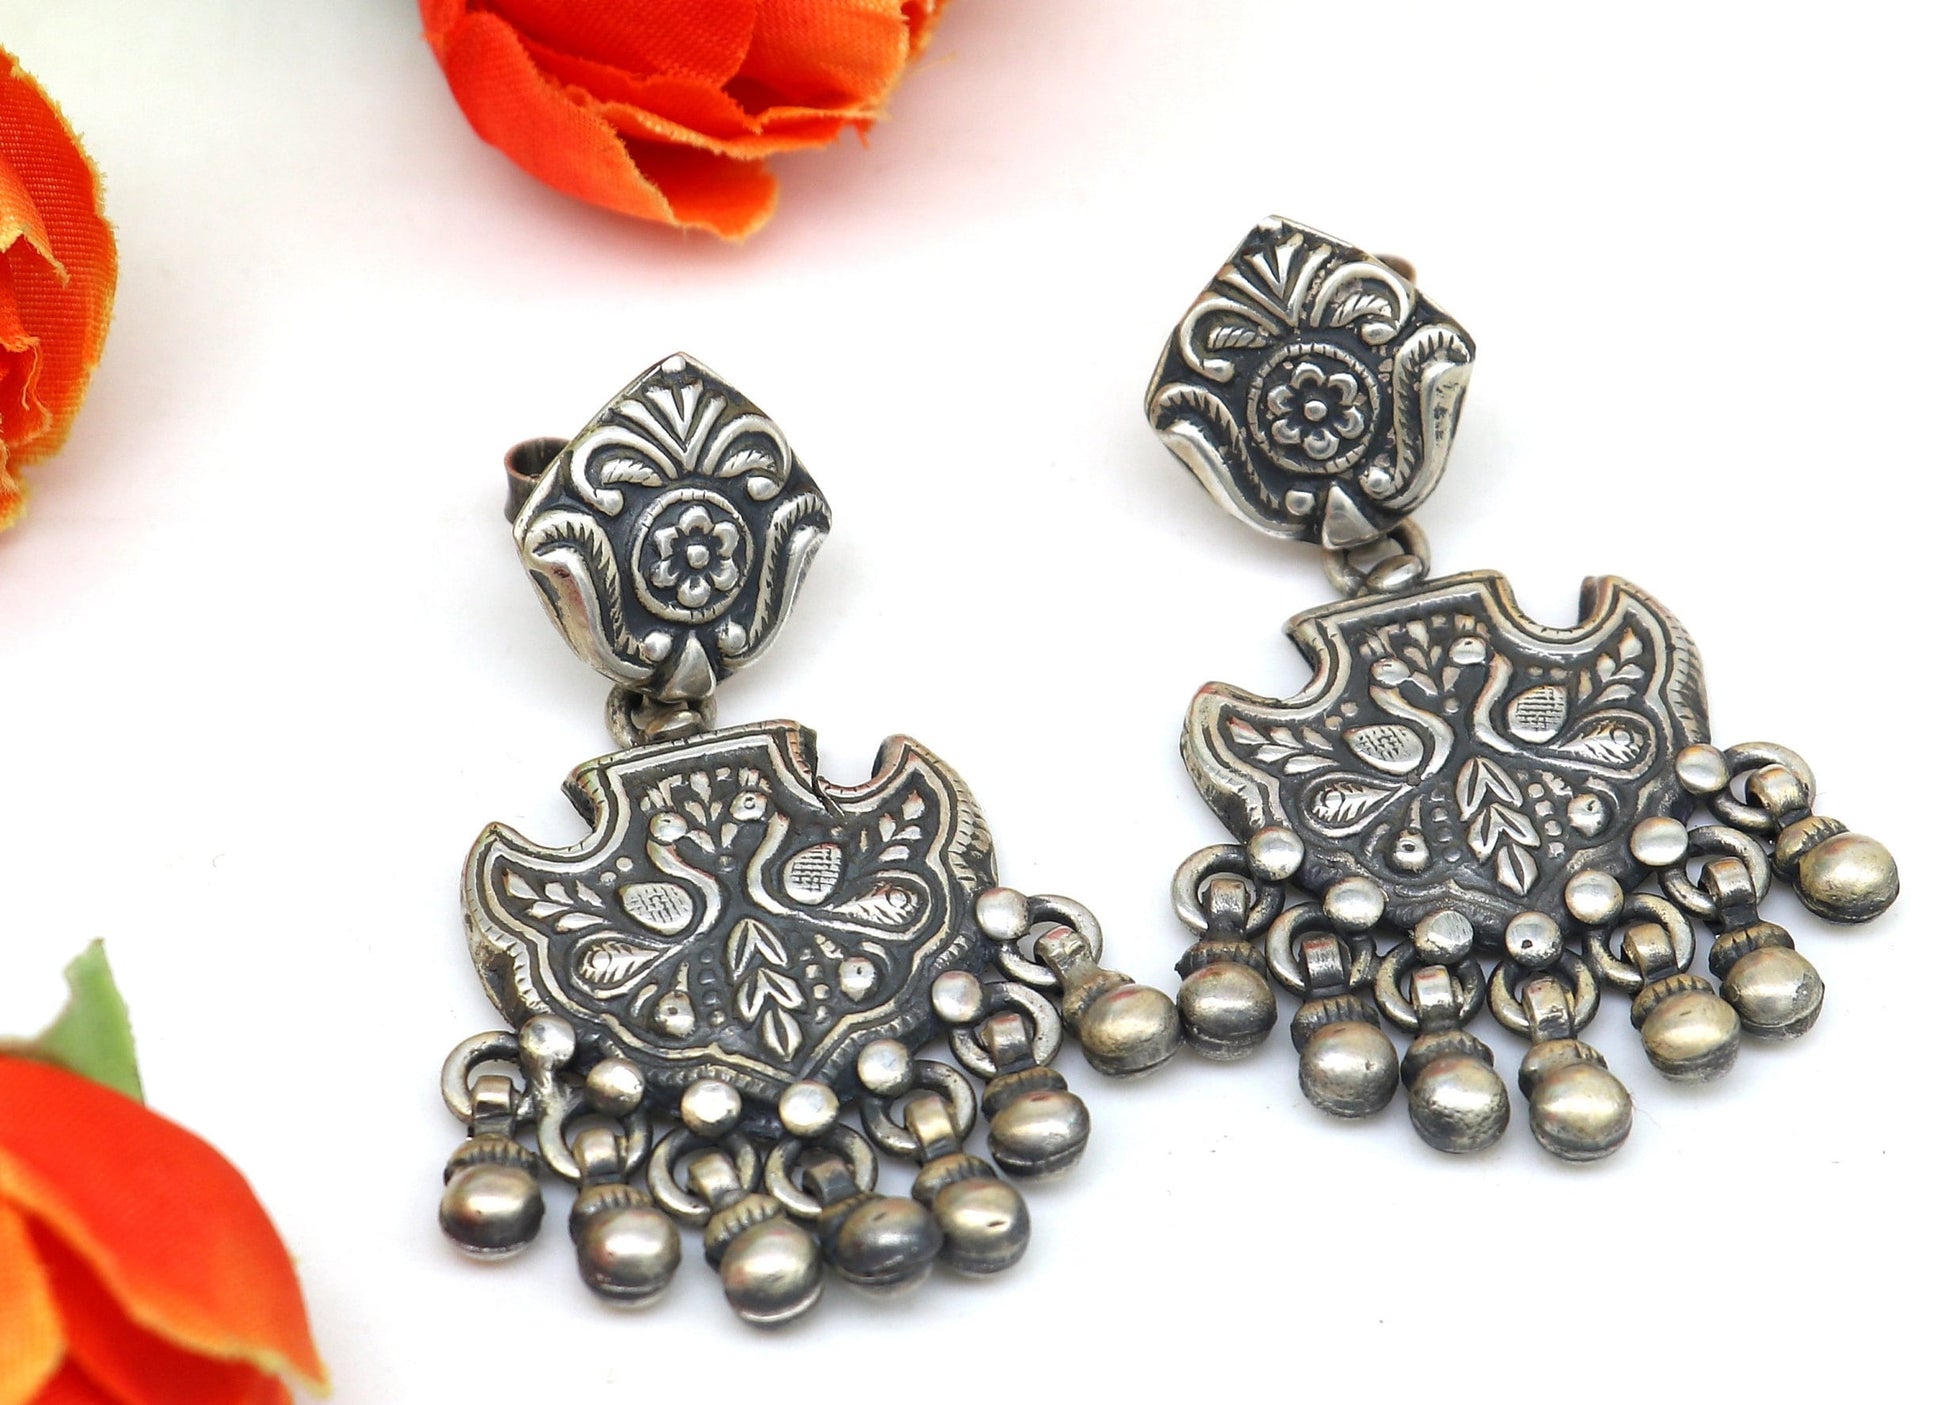 Vintage antique style handmade elegant peacock design hanging tiny drops stud earring, best brides charm jewelry ethnic tribal earring s979 - TRIBAL ORNAMENTS